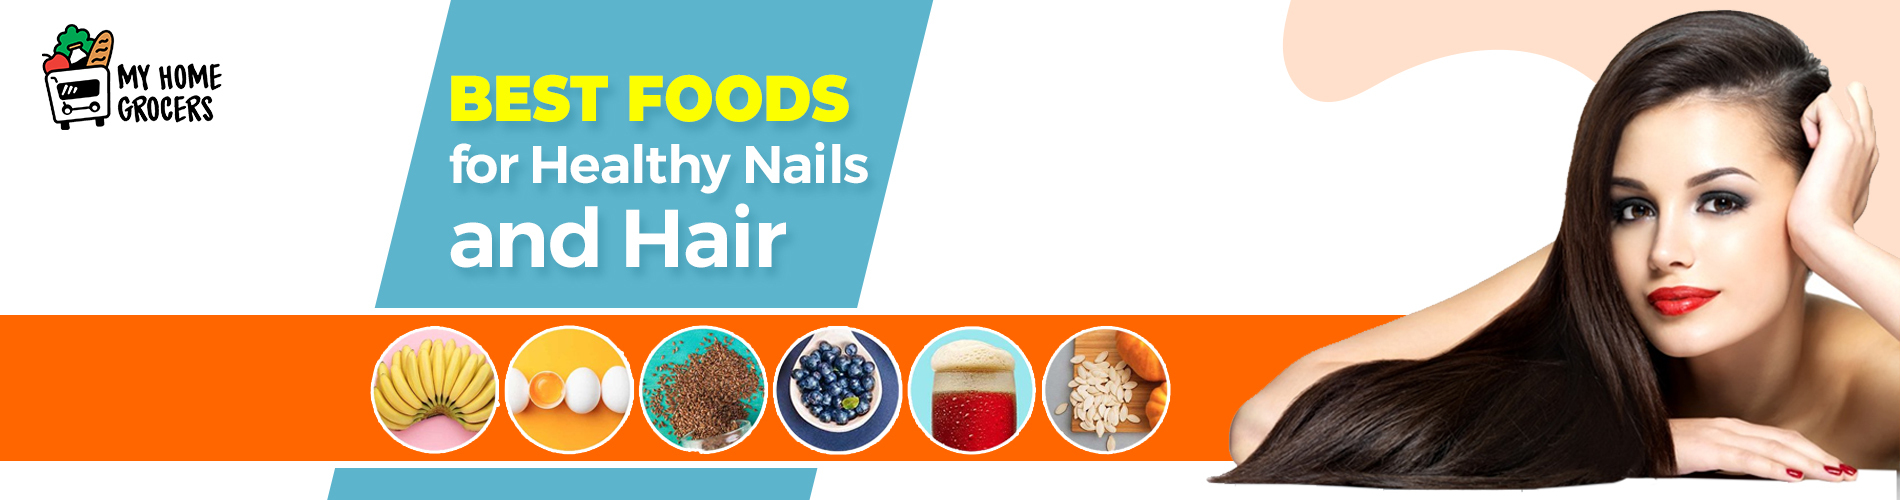 Best foods to eat for healthy nails and hair